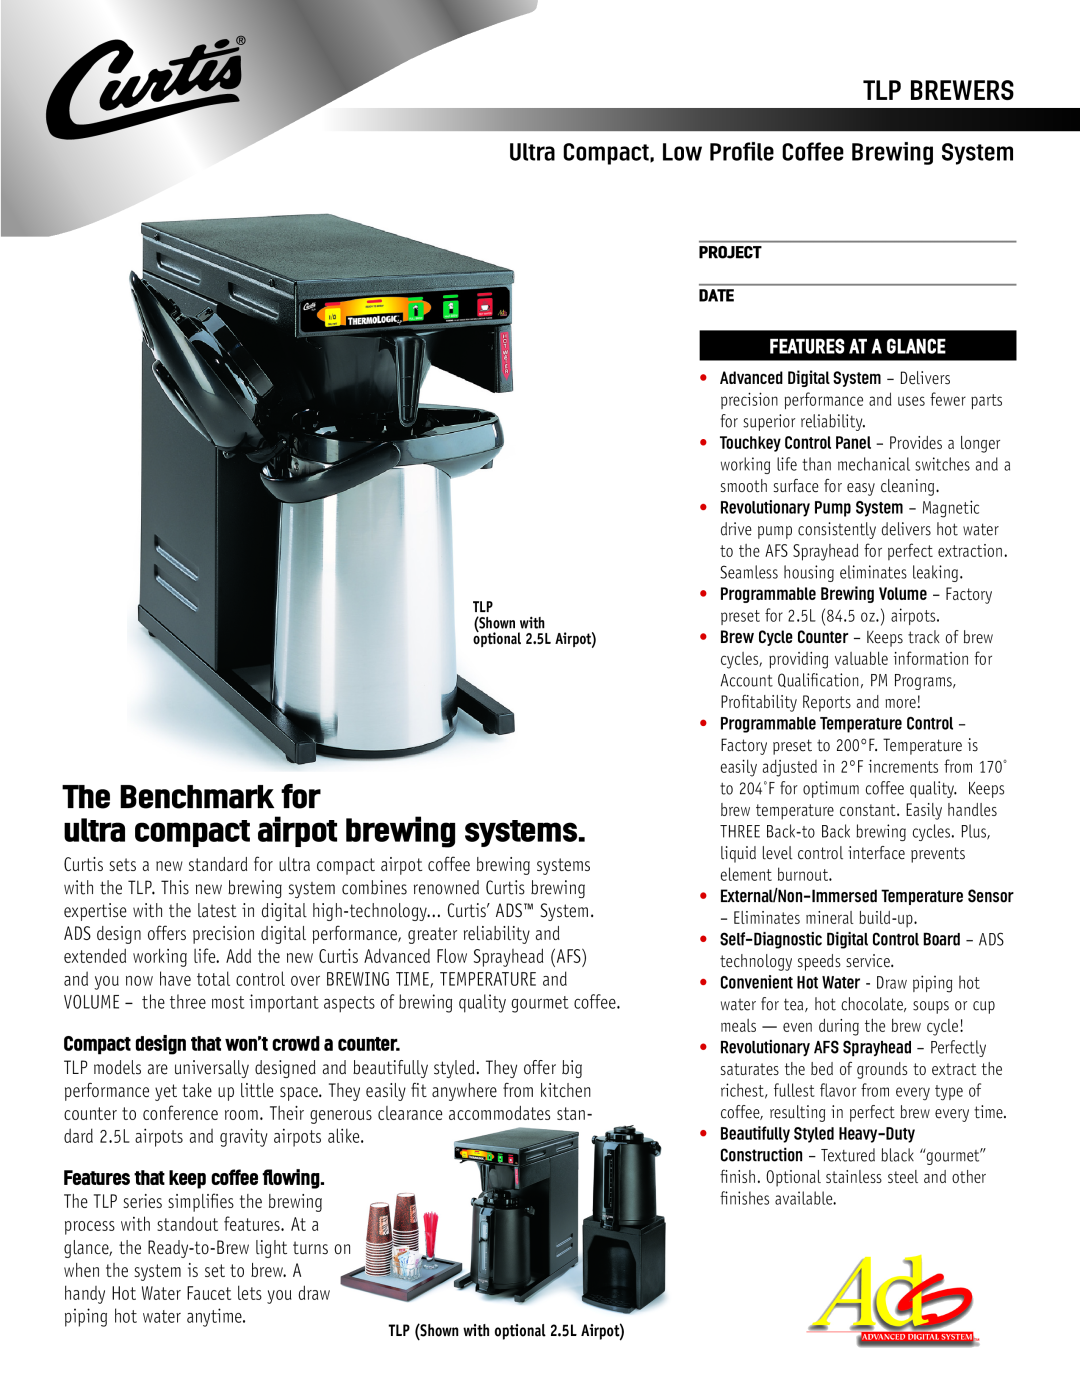 Wibur Curtis Company manual TLP Shown with optional 2.5L Airpot, Project Date, Tlp Brewers, Features At A Glance 